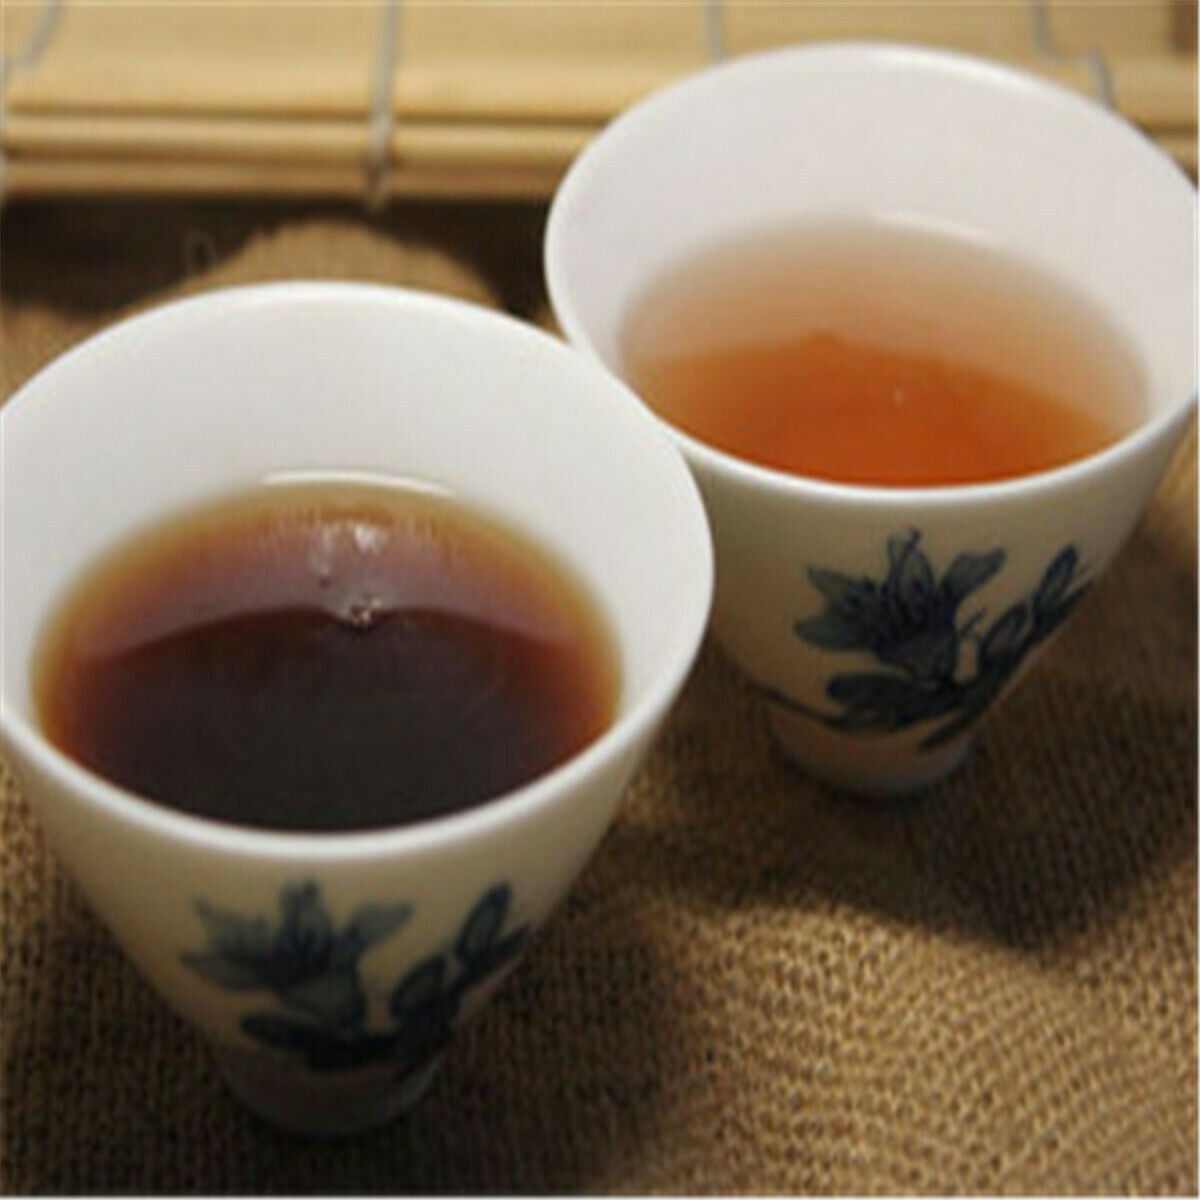 Tea resin, or Cha Gao, is an ancient method of tea-making that